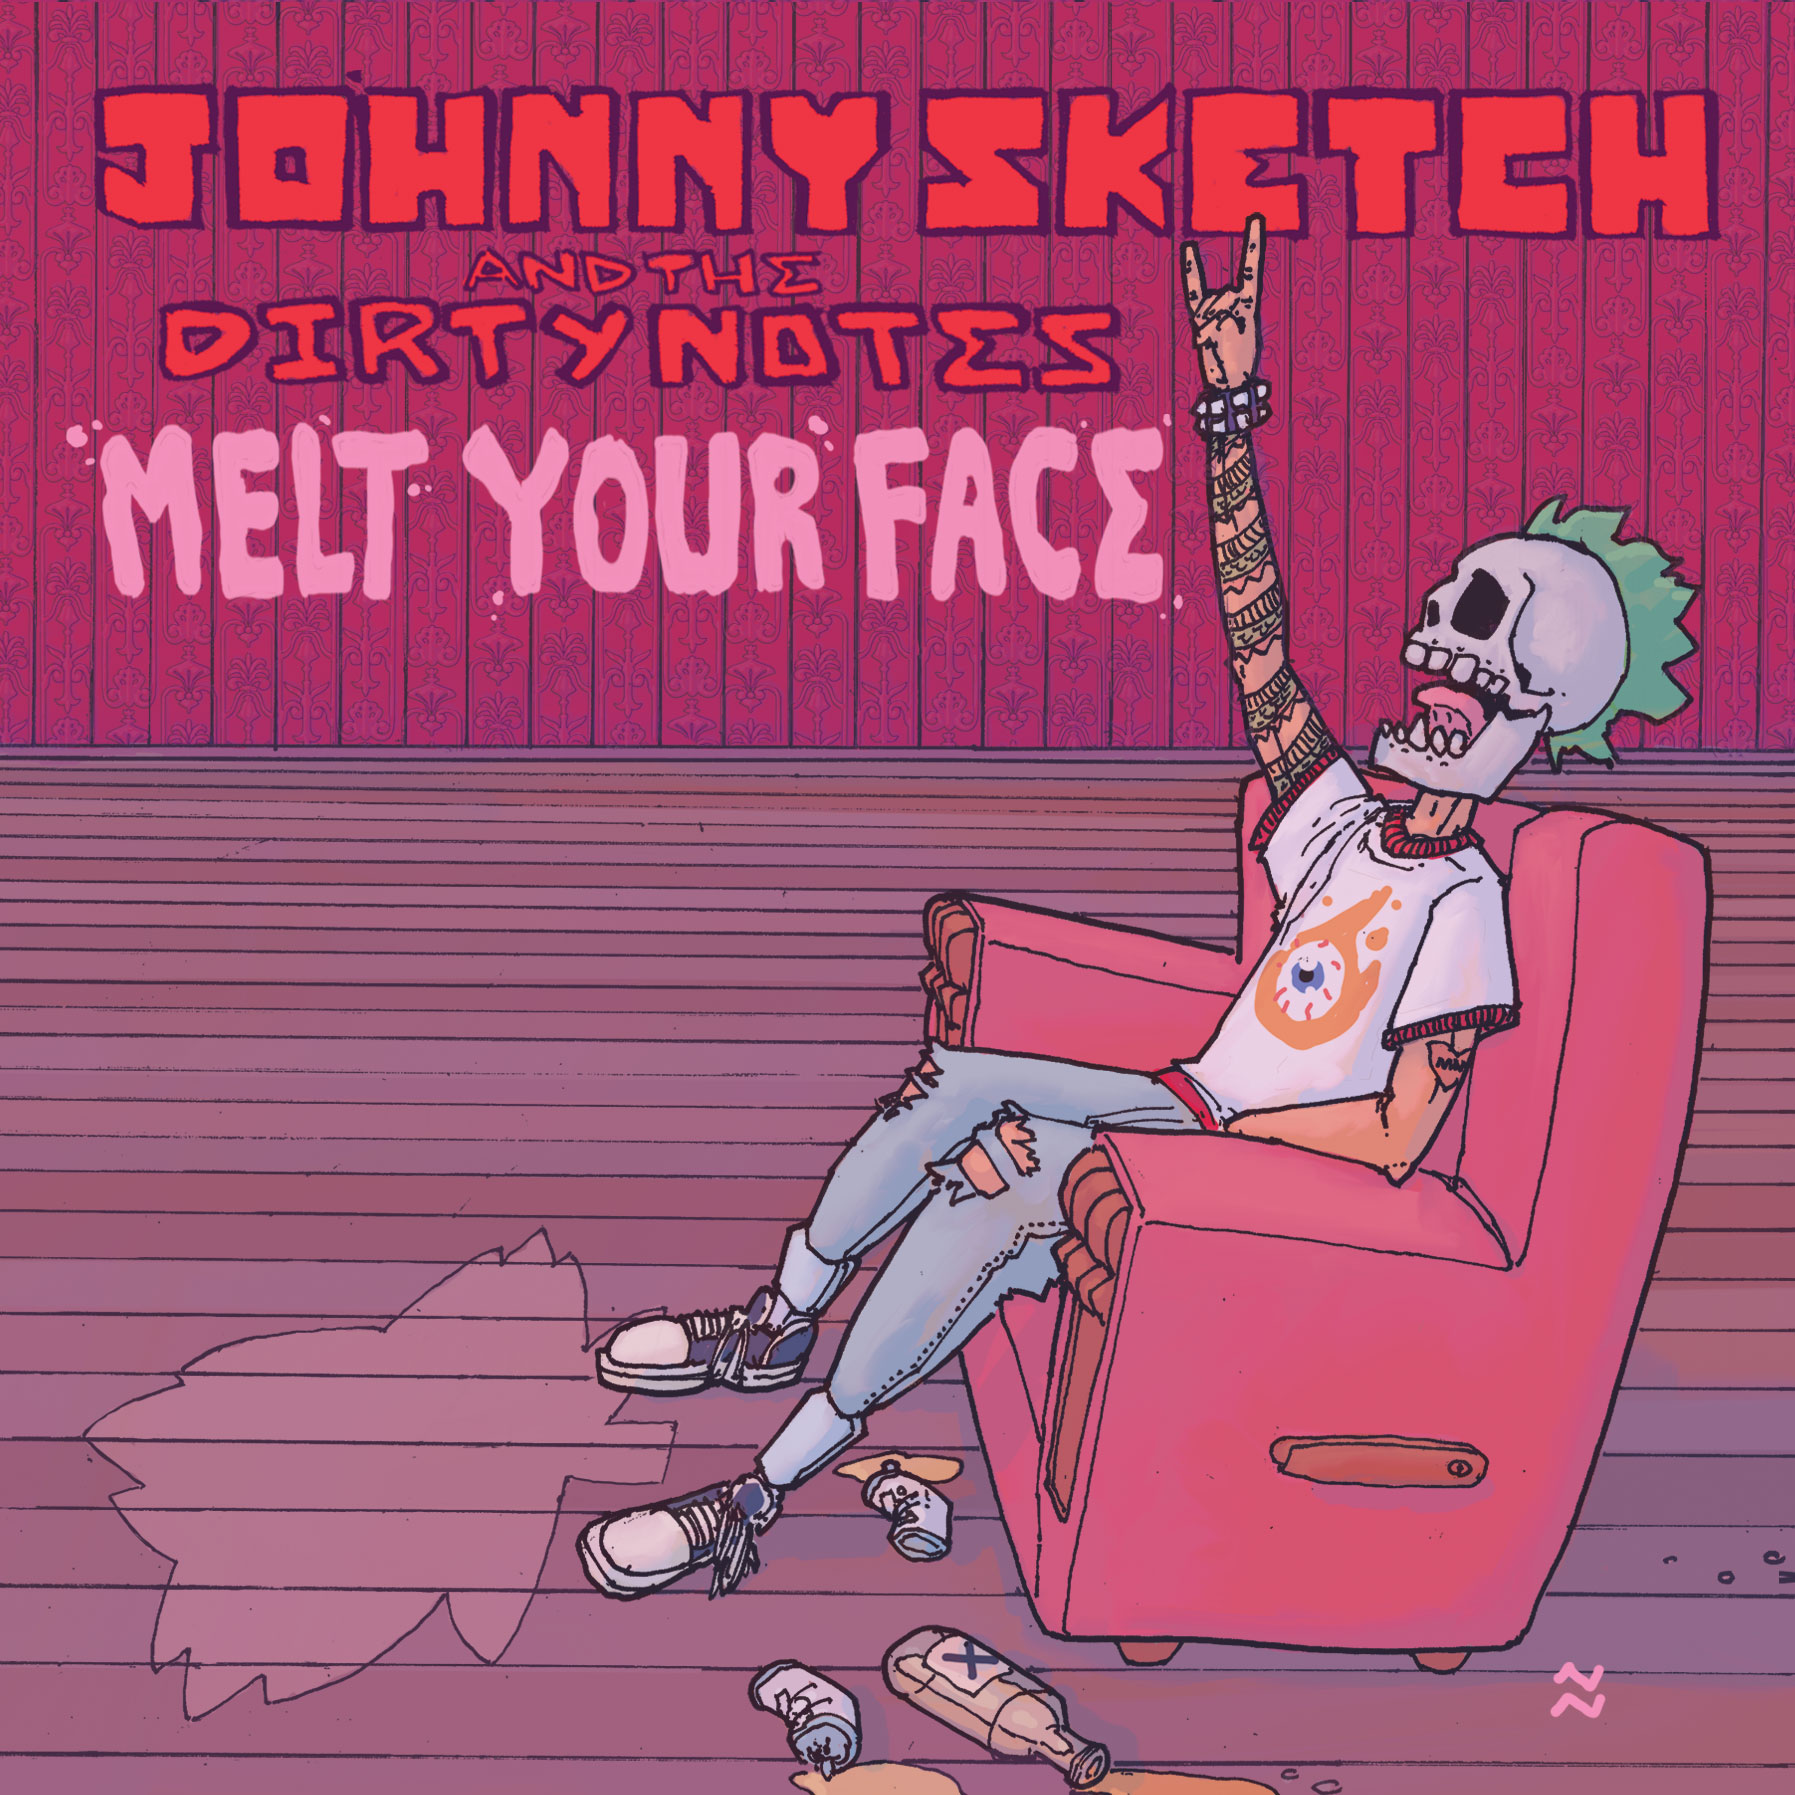 skeleton rocking out on a lazyboy recliner with the Johnny Sketch and the Dirty Notes melt your face written above image